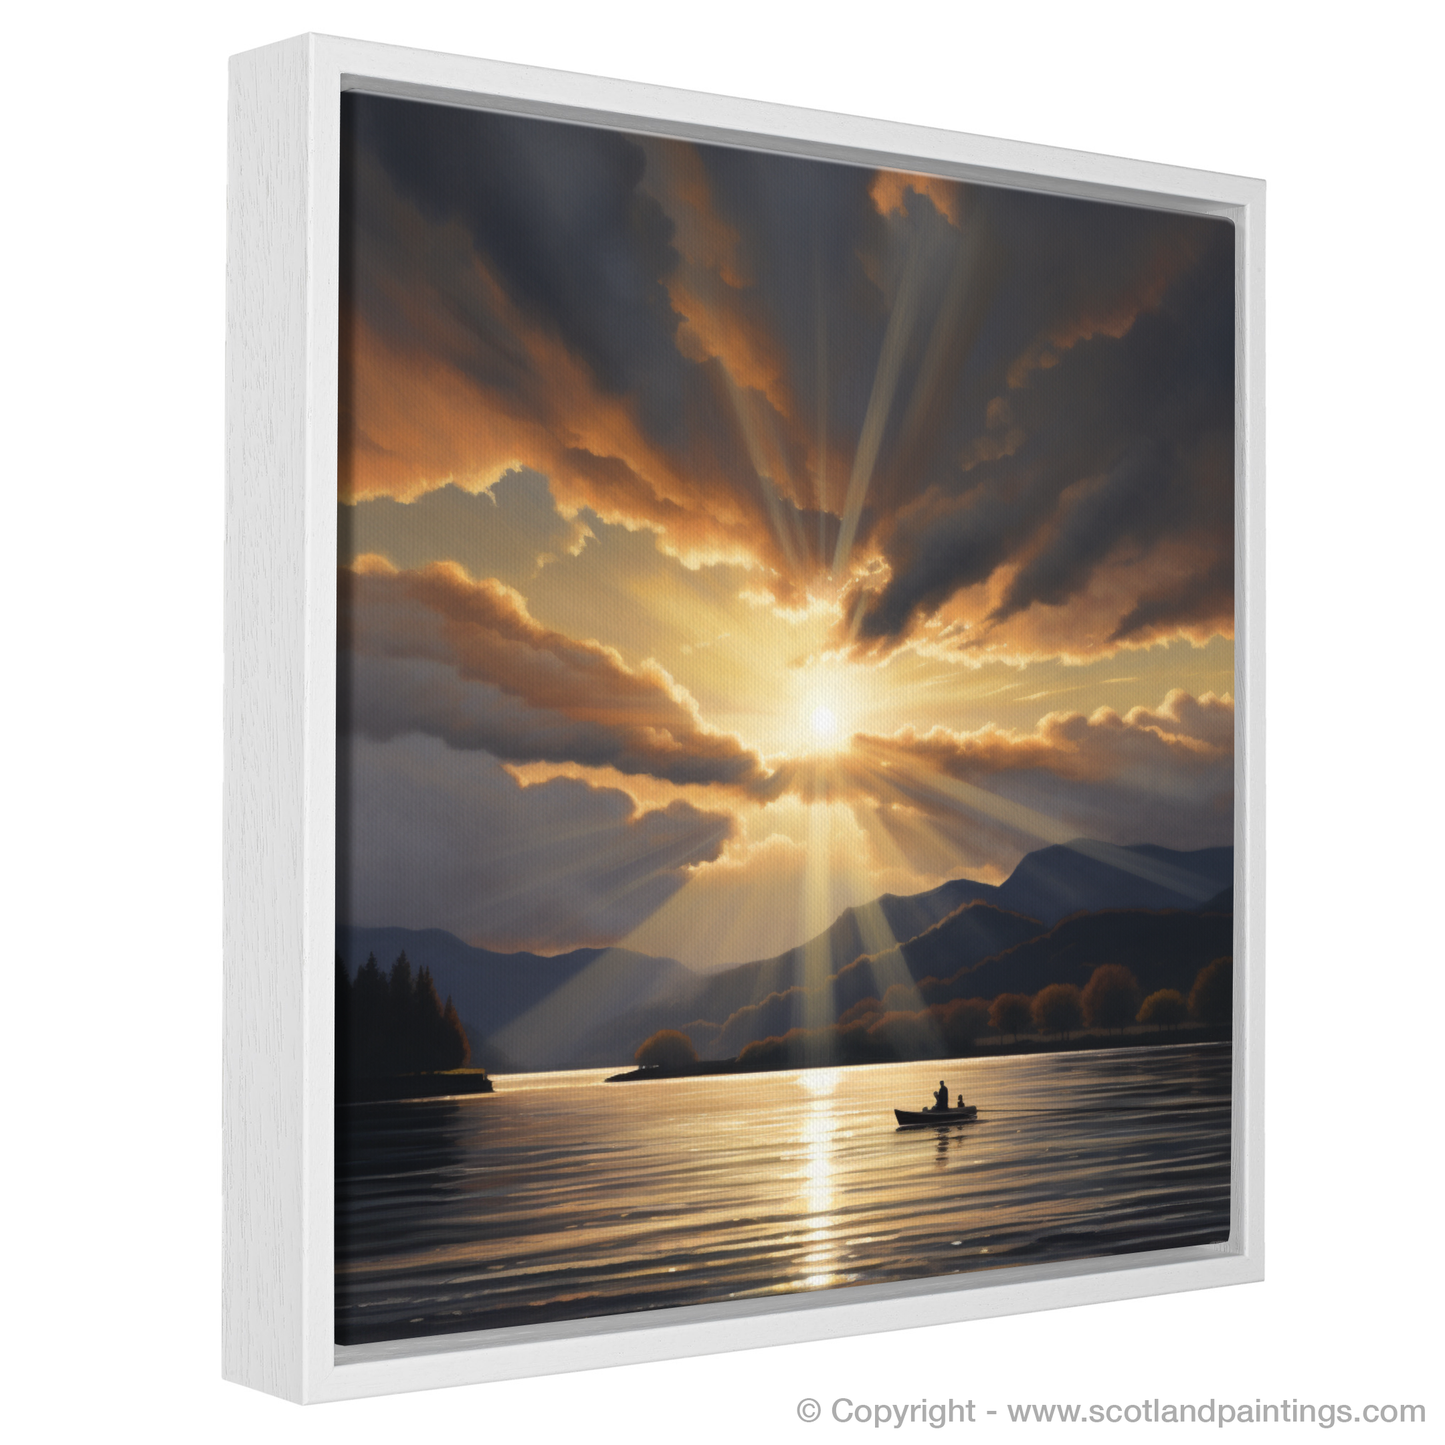 Painting and Art Print of Crepuscular rays above Loch Lomond entitled "Twilight Radiance Over Loch Lomond".